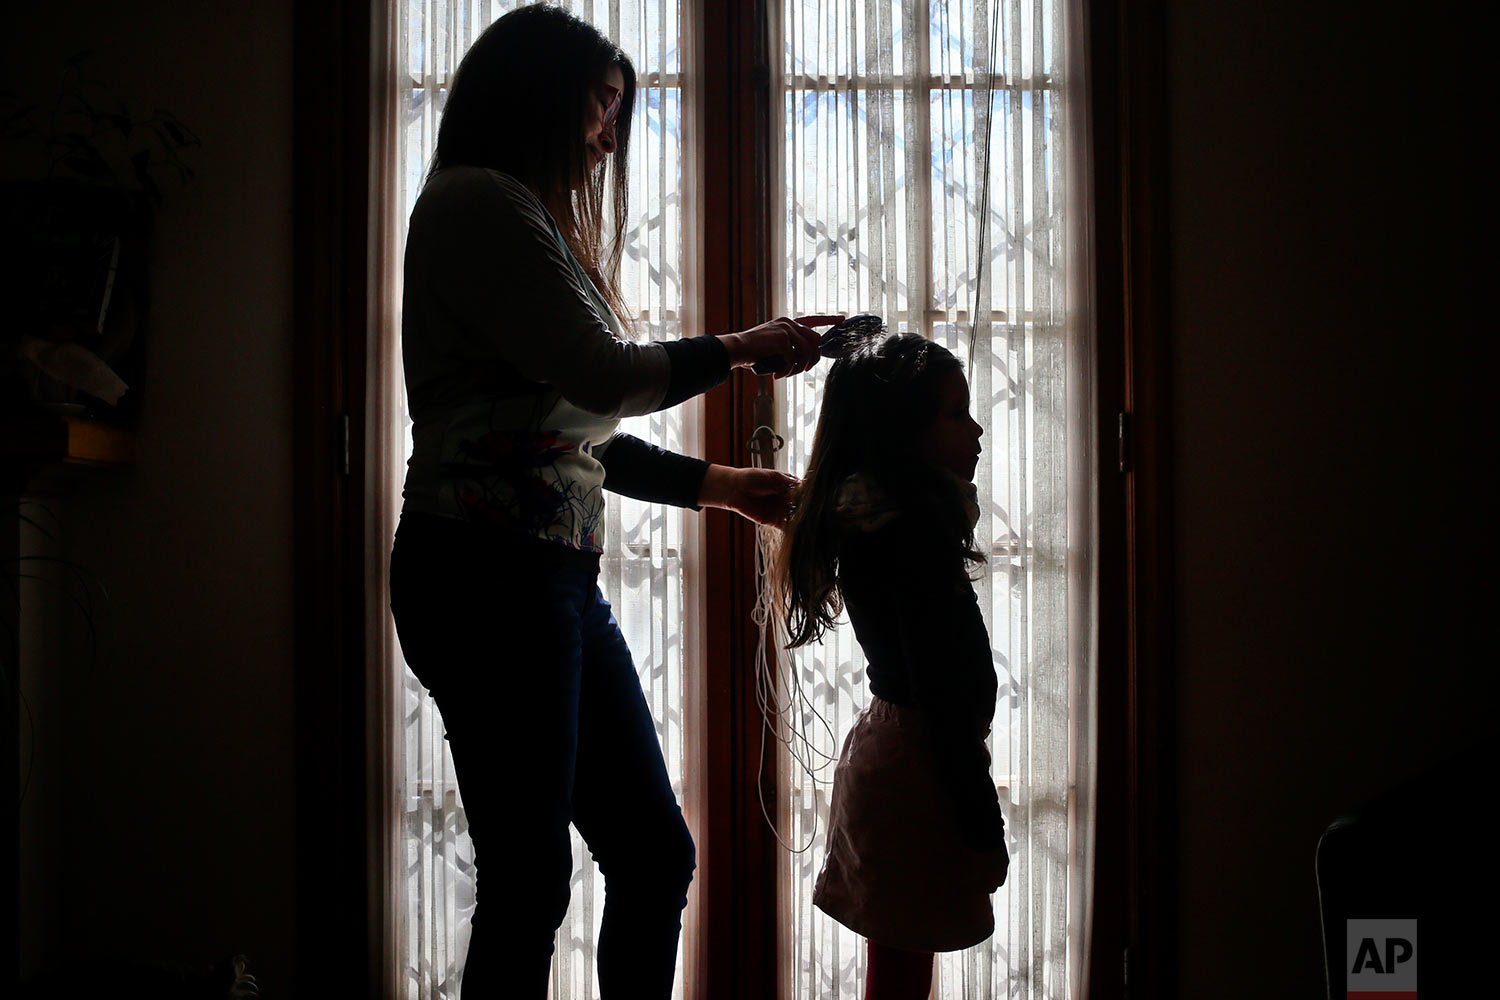  In this July 18, 2017 photo, Monica Flores combs her daughter's hair at their home in Santiago, Chile. Flores was questioned by Chilean police at the airport because the records didn't match: she had left on holidays abroad with a son and returned t